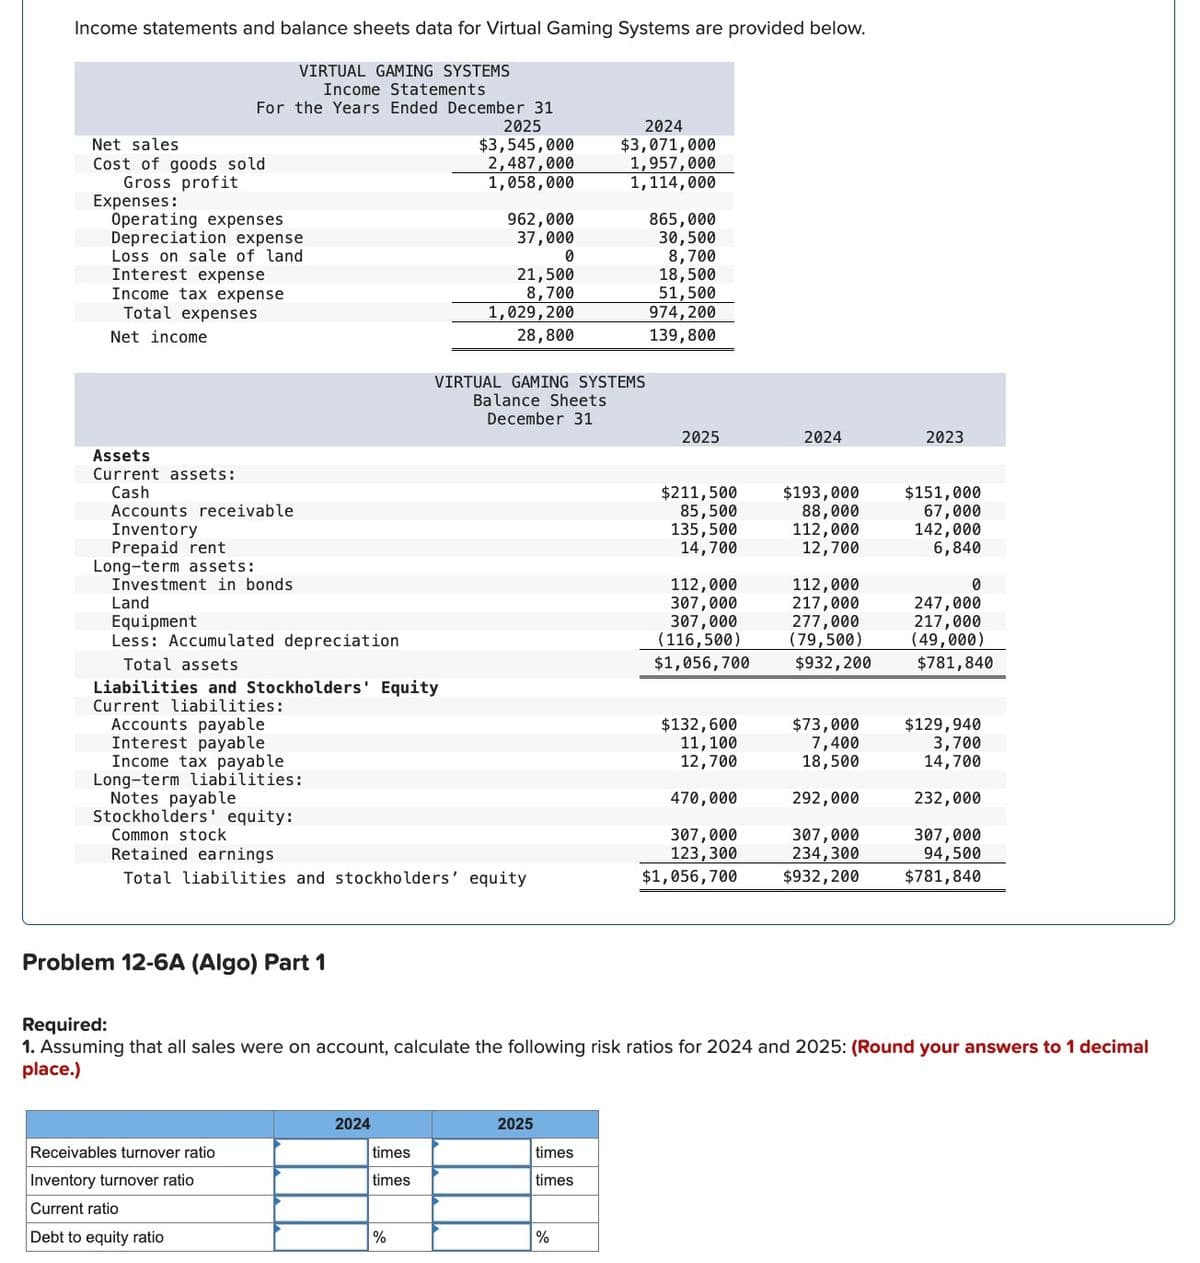 Income statements and balance sheets data for Virtual Gaming Systems are provided below.
VIRTUAL GAMING SYSTEMS
Income Statements
For the Years Ended December 31
Net sales
Cost of goods sold
Gross profit
Expenses:
Operating expenses
Depreciation expense
Loss on sale of land
Interest expense
Income tax expense
Total expenses
Net income
2025
$3,545,000
2024
$3,071,000
2,487,000
1,957,000
1,058,000
1,114,000
962,000
865,000
37,000
30,500
0
8,700
21,500
18,500
8,700
51,500
1,029,200
974,200
139,800
28,800
VIRTUAL GAMING SYSTEMS
Balance Sheets
December 31
2025
2024
2023
Assets
Current assets:
Cash
Accounts receivable
Inventory
Prepaid rent
Long-term assets:
Investment in bonds
Land
Equipment
$211,500
85,500
$193,000
88,000
135,500
112,000
$151,000
67,000
142,000
14,700
12,700
6,840
112,000
112,000
0
307,000
217,000
247,000
307,000
277,000
217,000
Less: Accumulated depreciation
(116,500)
(79,500)
(49,000)
Total assets
$1,056,700
$932,200
$781,840
Liabilities and Stockholders' Equity
Current liabilities:
Accounts payable
$132,600
$73,000
$129,940
Interest payable
11,100
7,400
3,700
Income tax payable
12,700
18,500
14,700
Long-term liabilities:
Notes payable
470,000
292,000
232,000
Stockholders' equity:
Common stock
307,000
307,000
307,000
Retained earnings
123,300
234,300
94,500
Total liabilities and stockholders' equity
$1,056,700
$932,200
$781,840
Problem 12-6A (Algo) Part 1
Required:
1. Assuming that all sales were on account, calculate the following risk ratios for 2024 and 2025: (Round your answers to 1 decimal
place.)
Receivables turnover ratio
Inventory turnover ratio
Current ratio
Debt to equity ratio
2024
2025
times
times
times
times
%
%